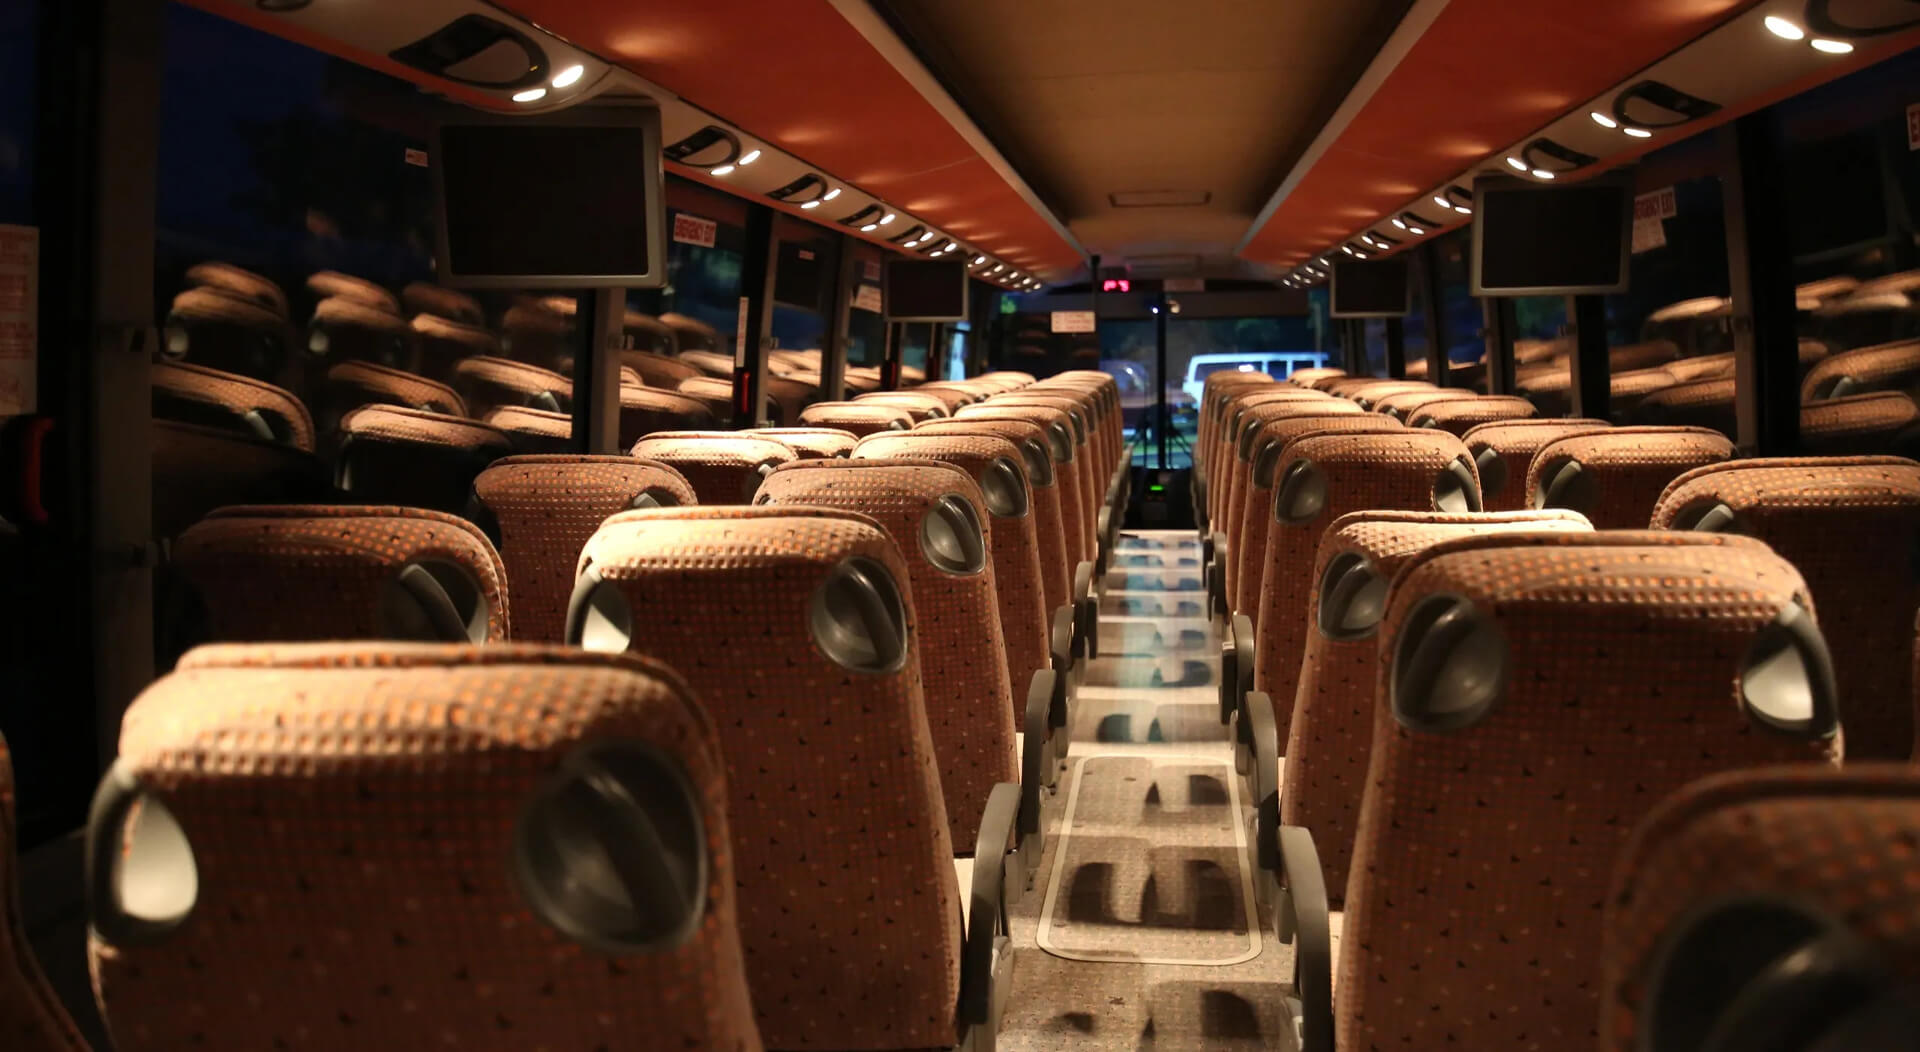 big and luxurious interior of party bus